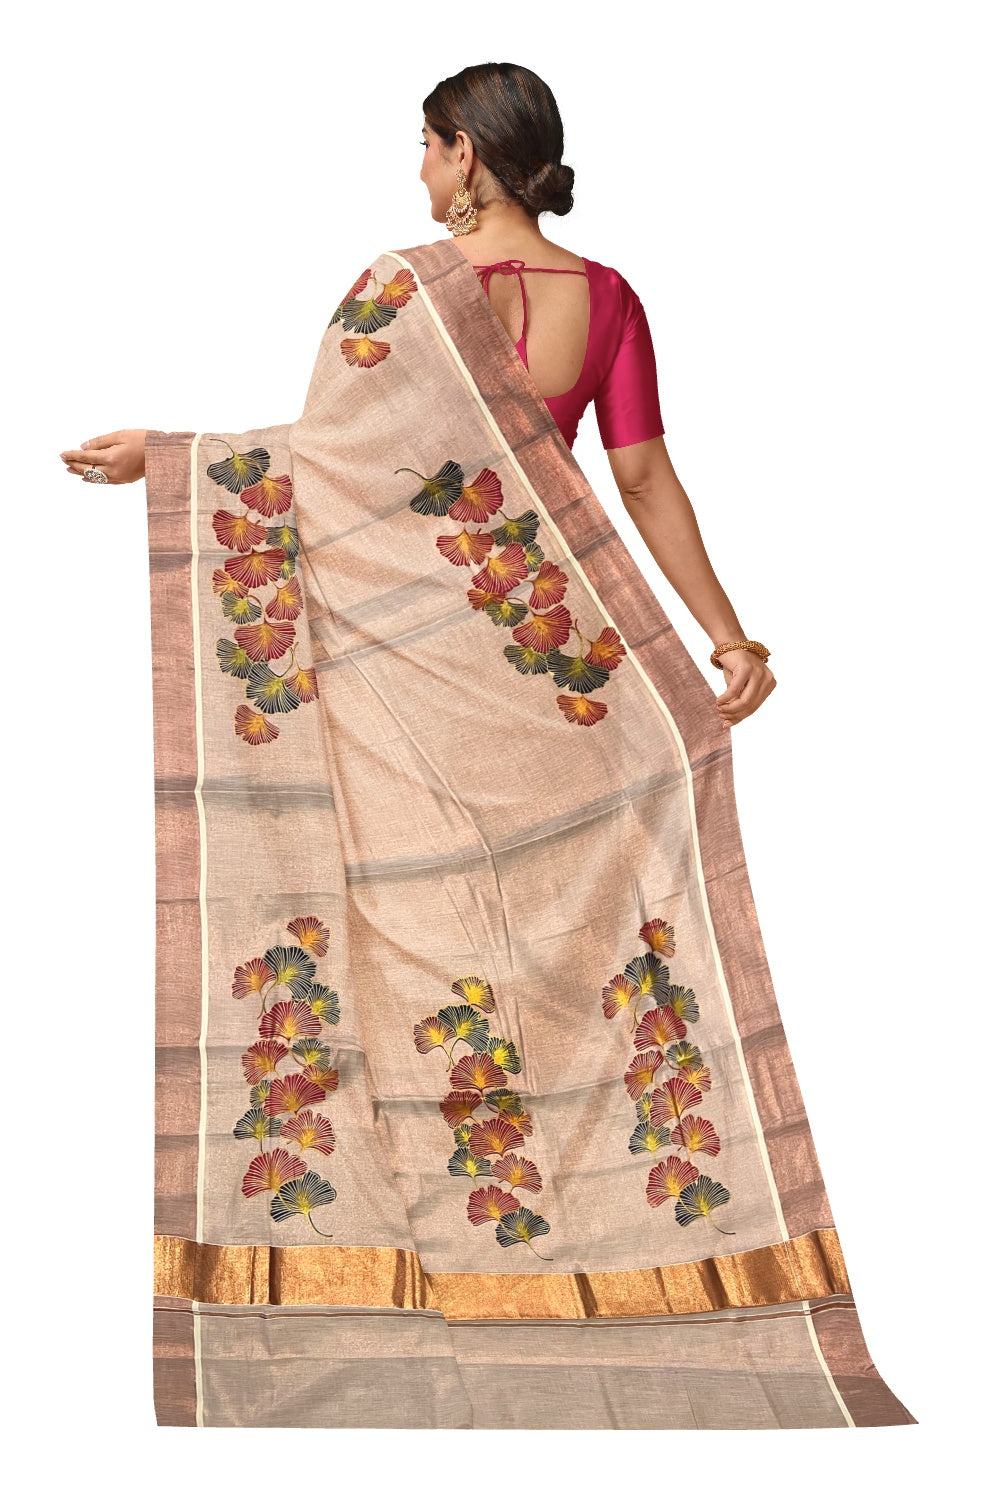 Kerala Copper Tissue Kasavu Saree With Mural Printed Black and Red Floral Design